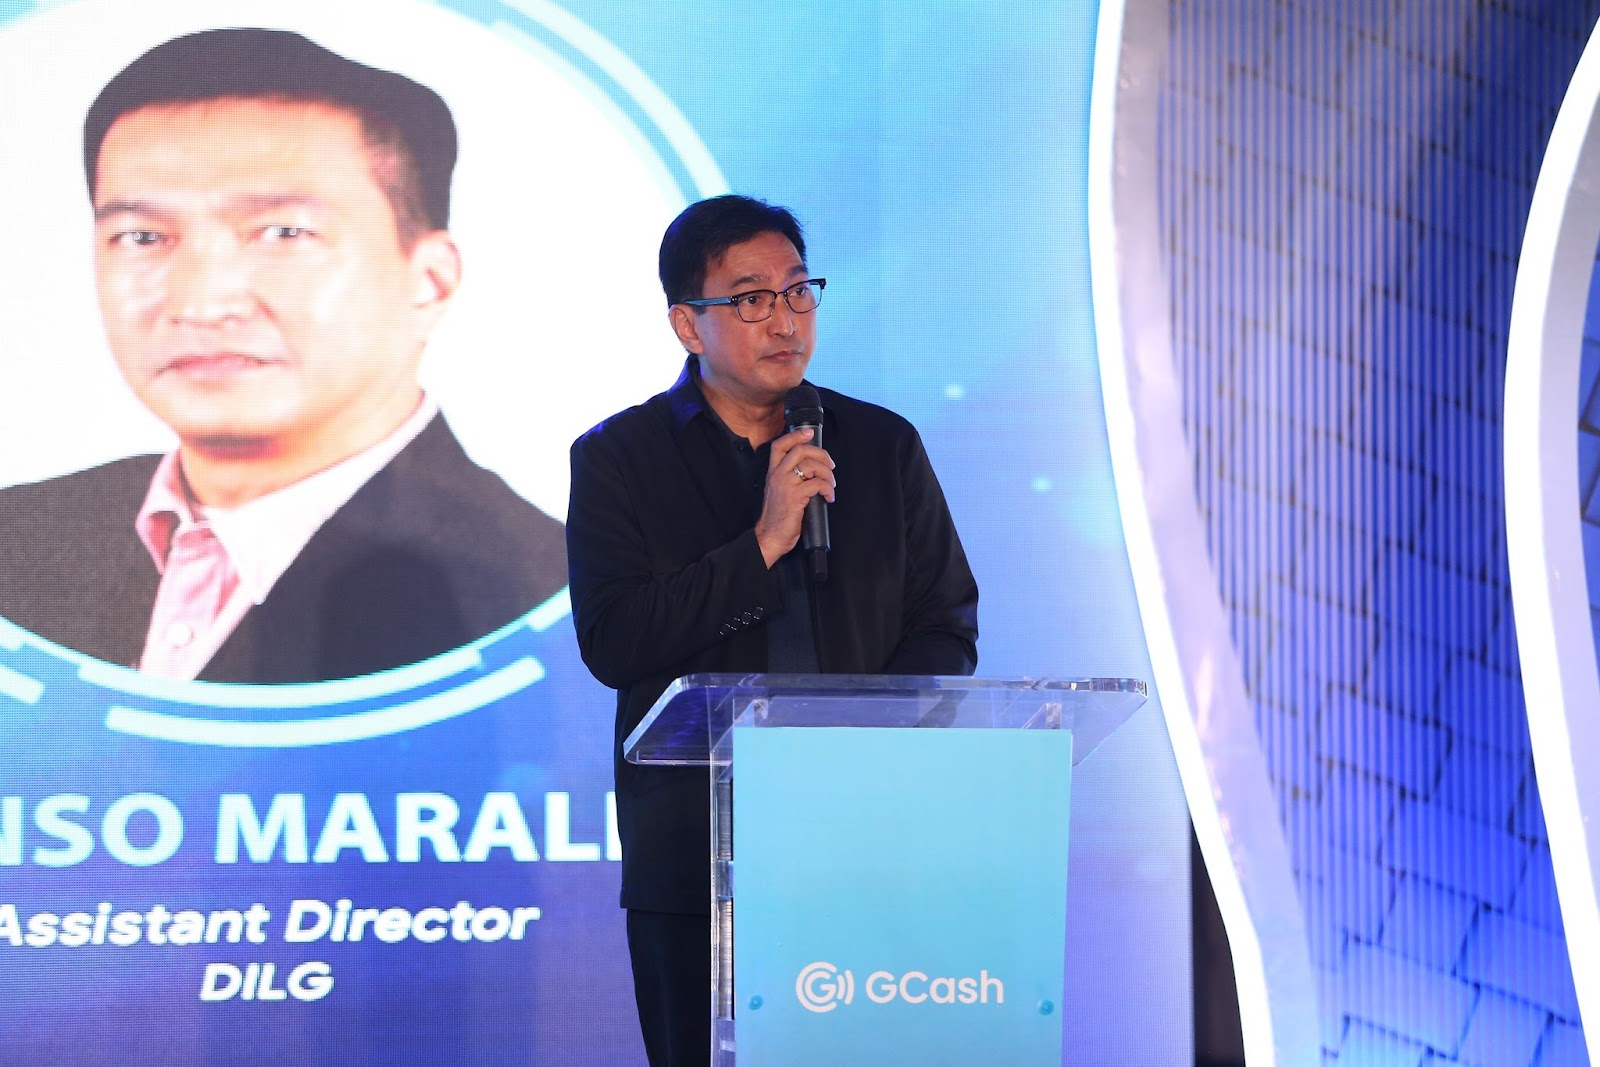 GCash joins hands with BSP, DILG on Paleng-QR Ph rollout in Visayas to promote finance for all